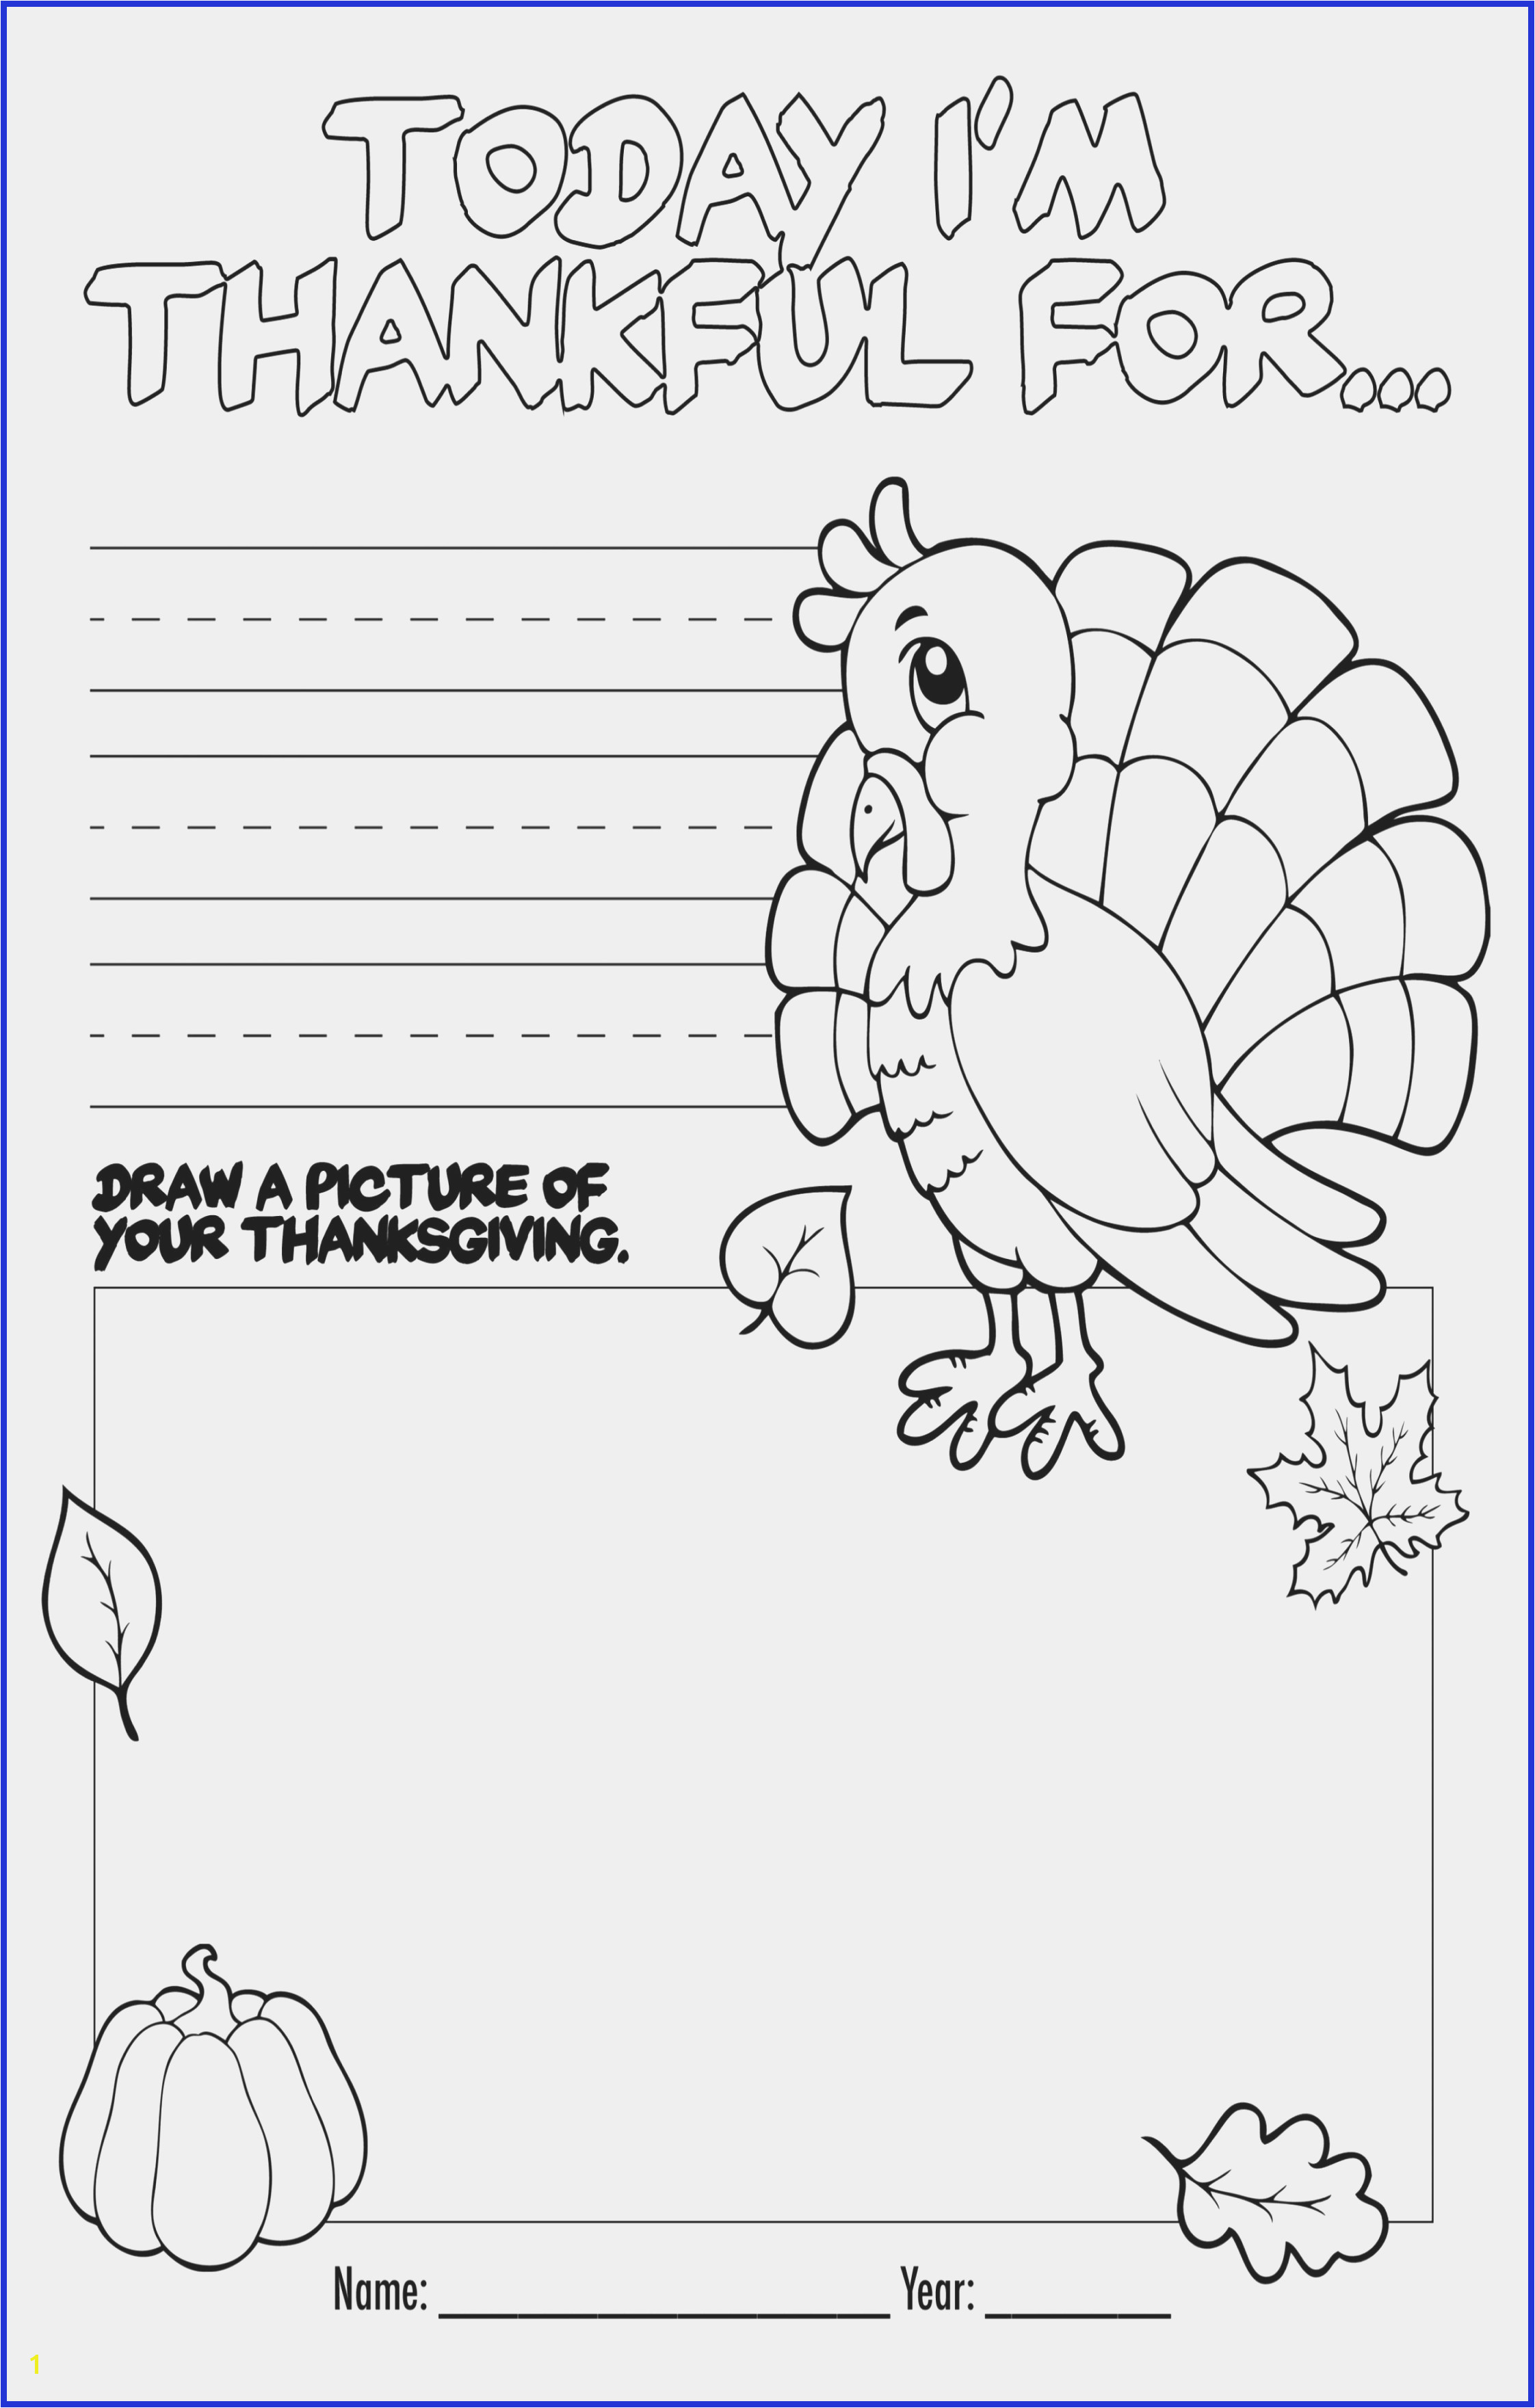 I Am Thankful Coloring Pages 16 Inspirational Thanksgiving Coloring Sheets to Print